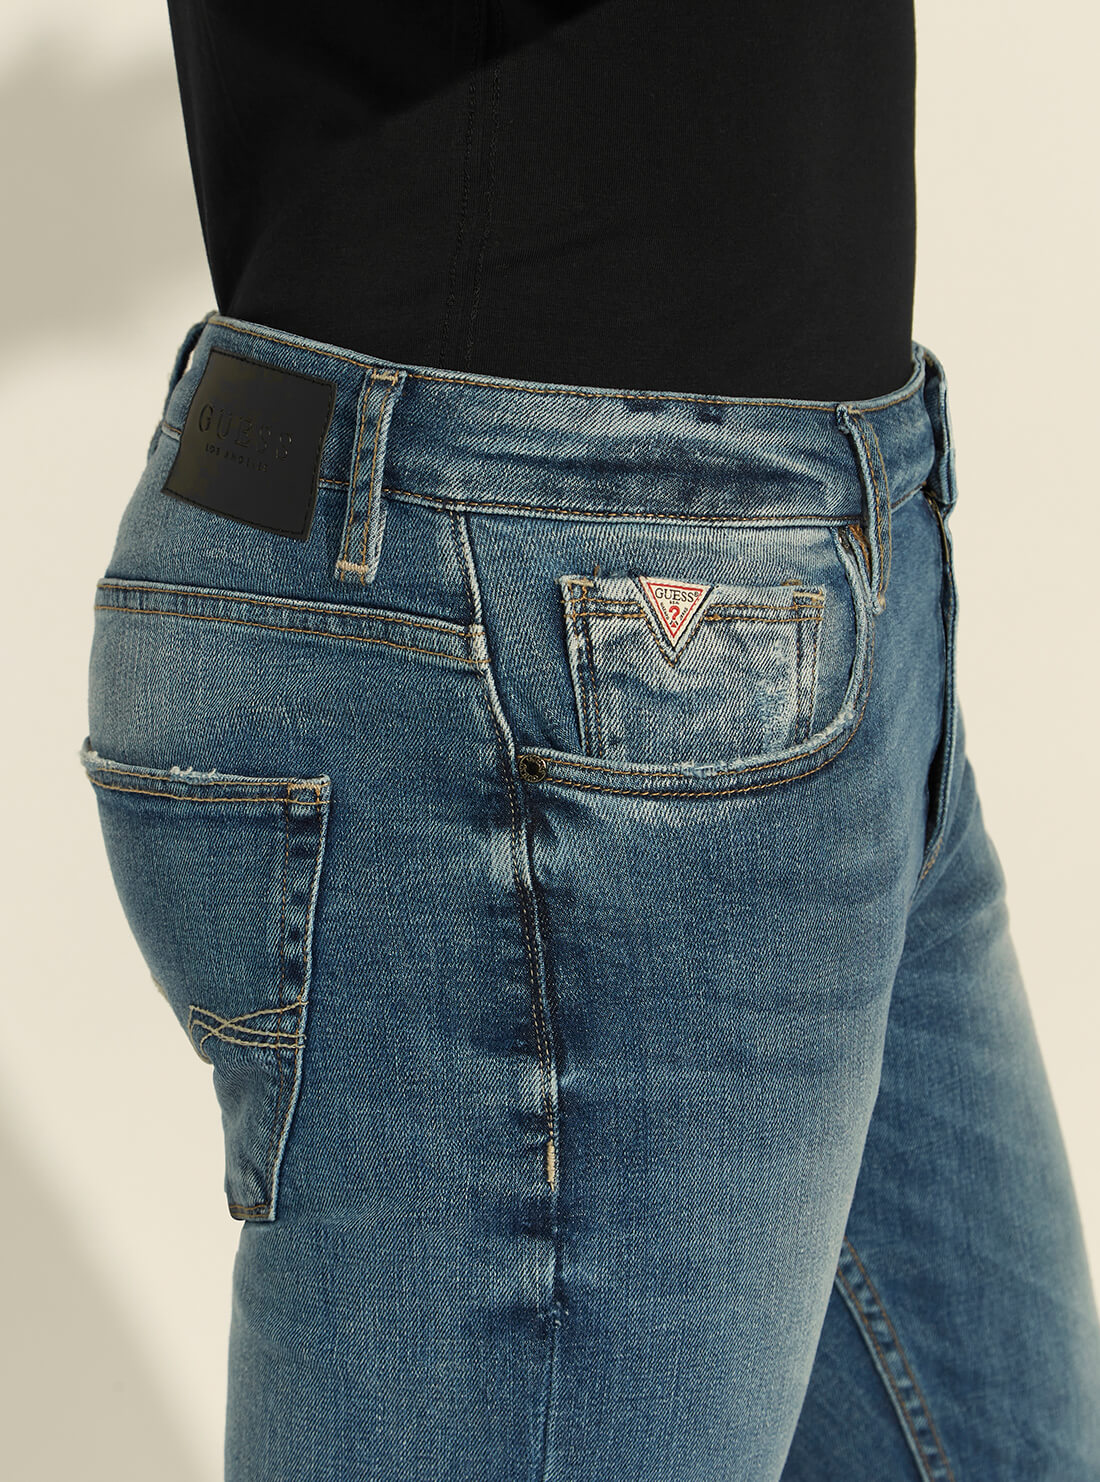 GUESS Mens Mid-Rise Athletic Tapered Denim Jeans in Union Wash MBRAR53041B Detail View